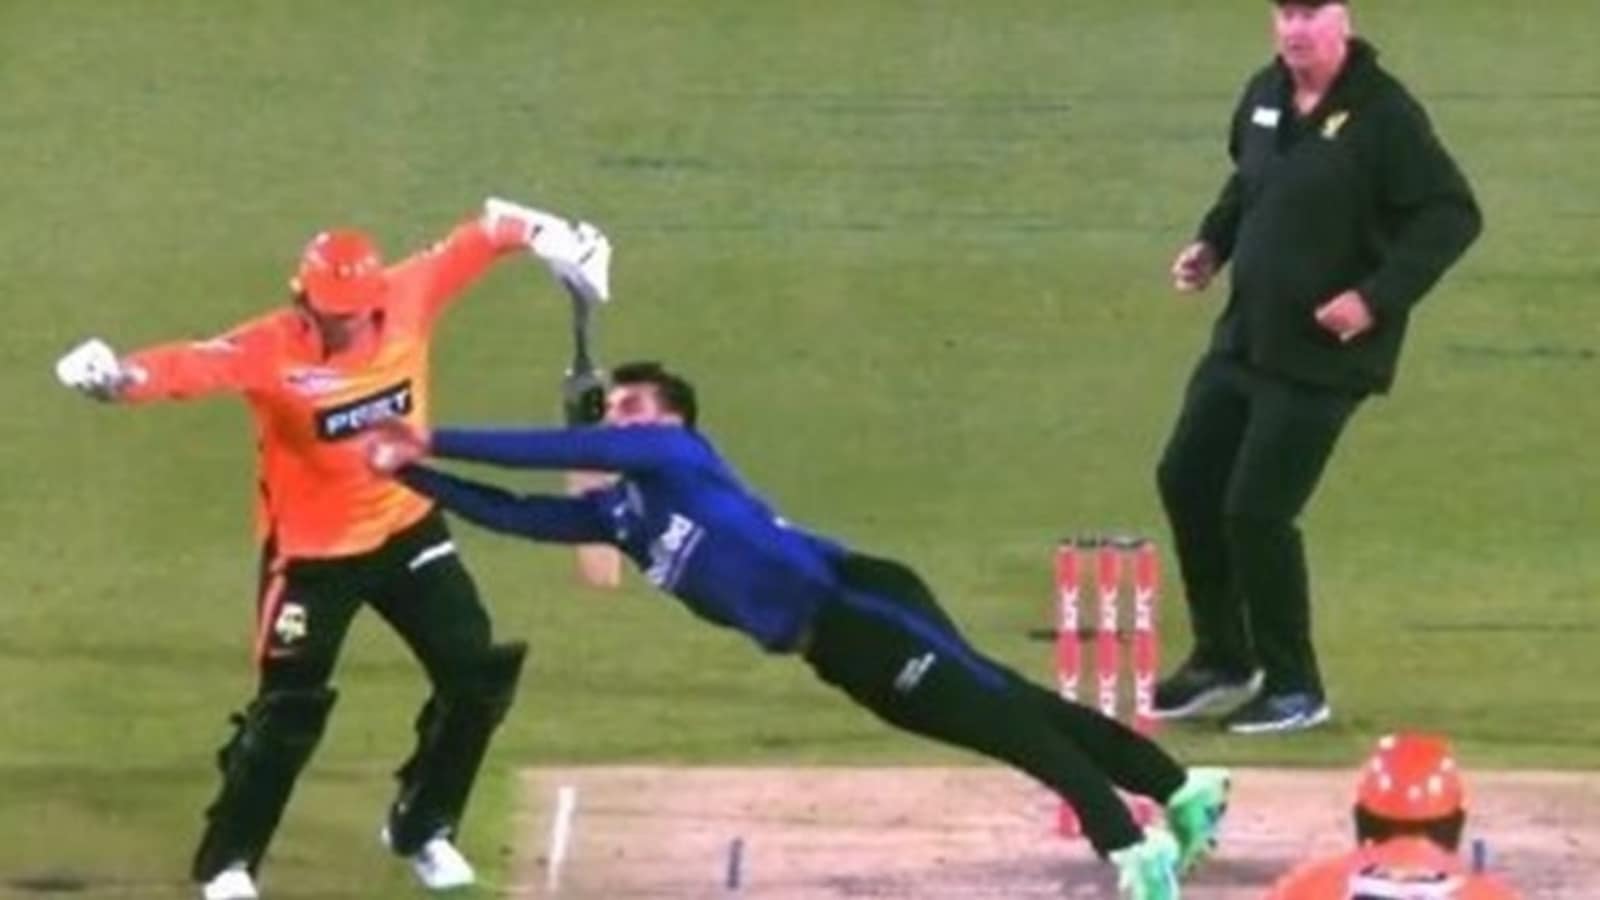 Watch - Shadab Khan grabs insane catch off his own bowling Fully horizontal Cricket